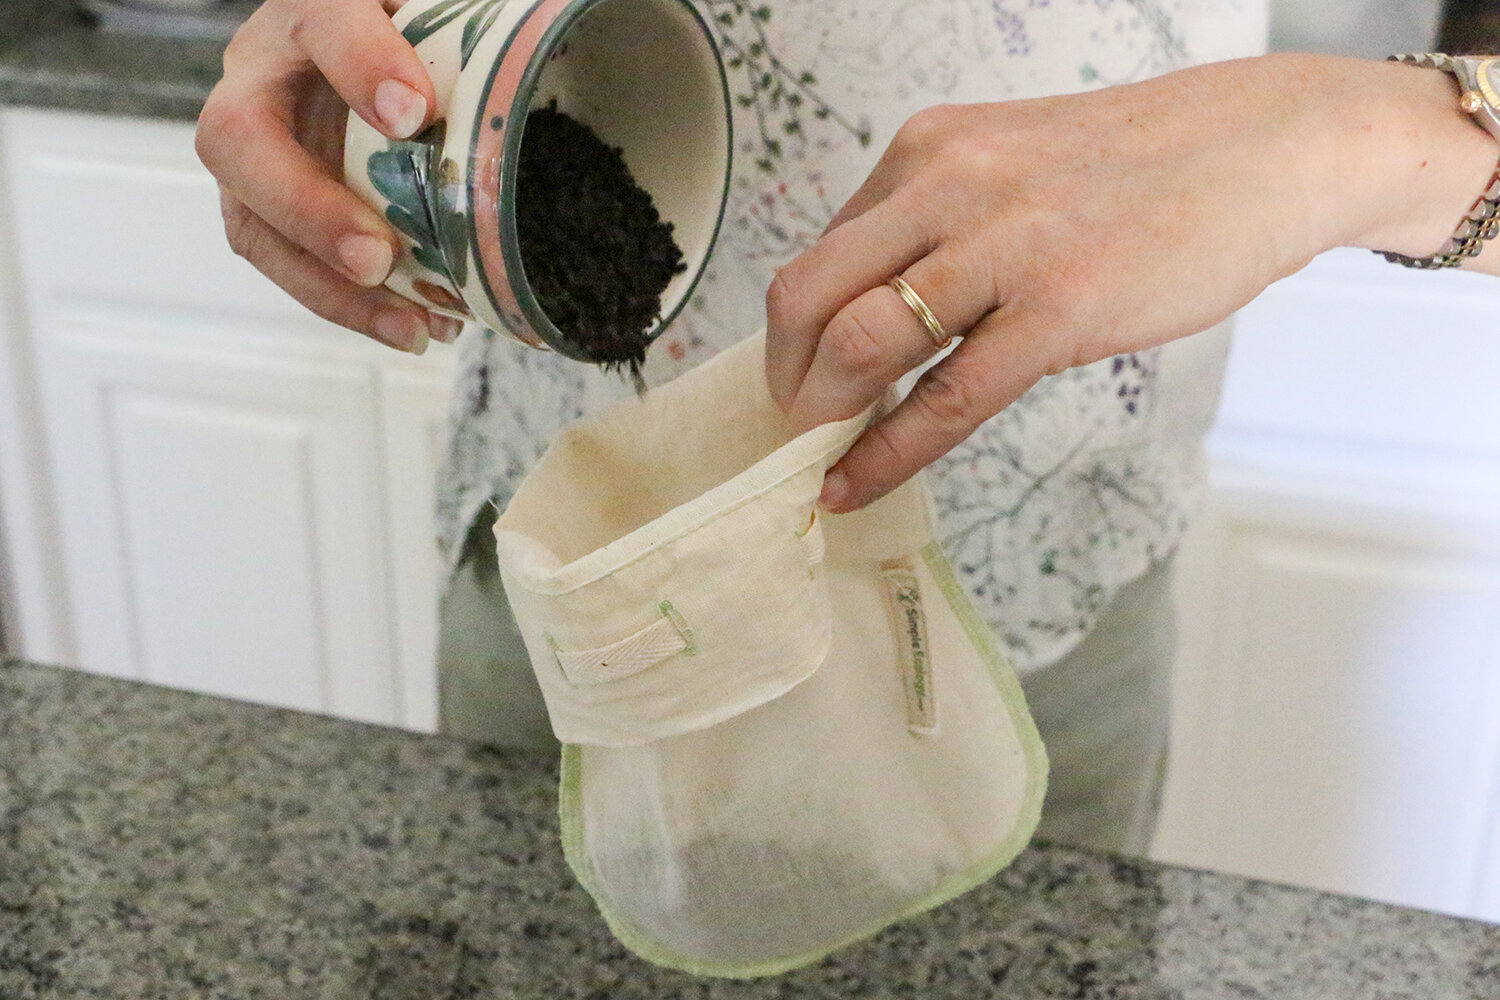 Place coffee grounds into a Reusable Straining Bag